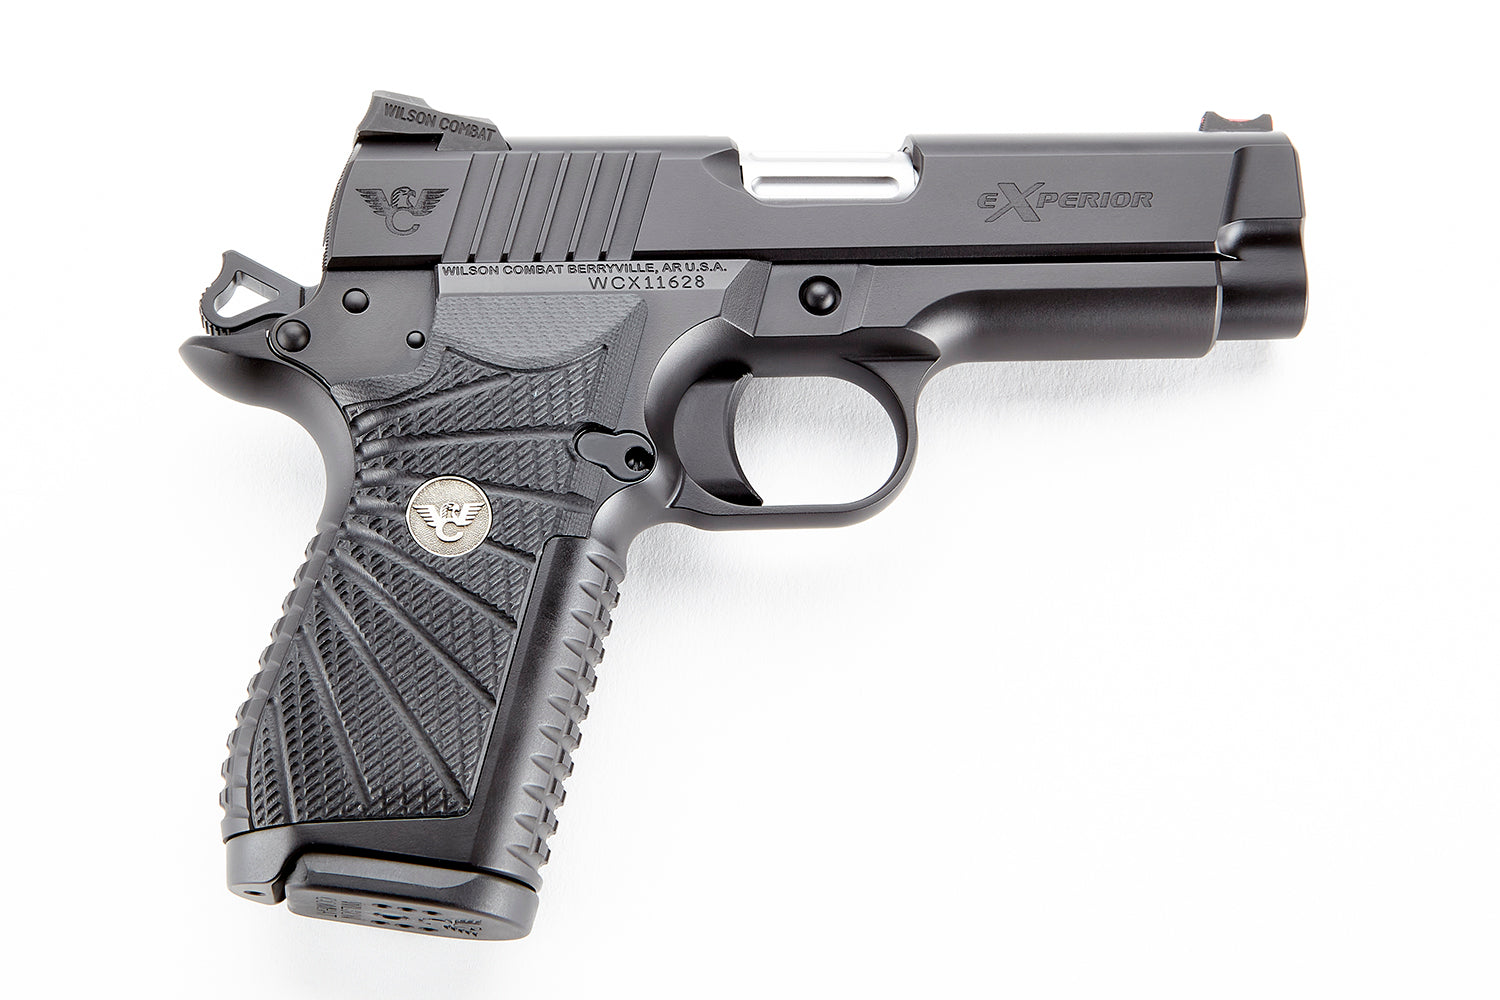 Wilson Combat Experior compact double stack Review: Pros and cons of the Experior compact double stack